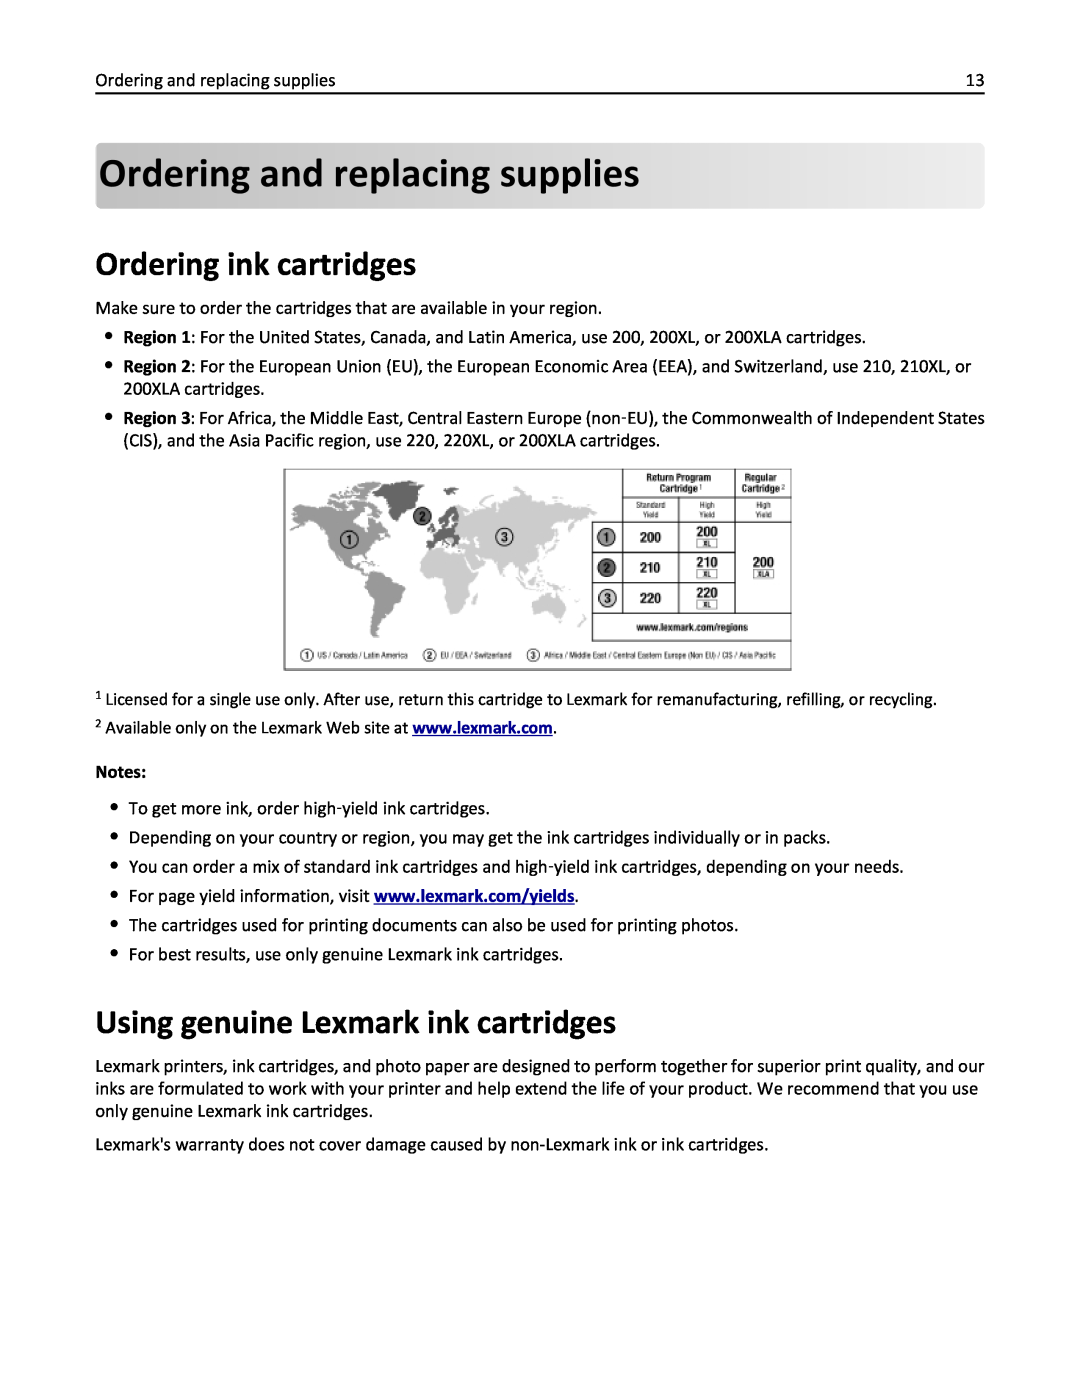 Lexmark 200, 20E Ordering and replacing supplies, Ordering ink cartridges, Using genuine Lexmark ink cartridges, Notes 